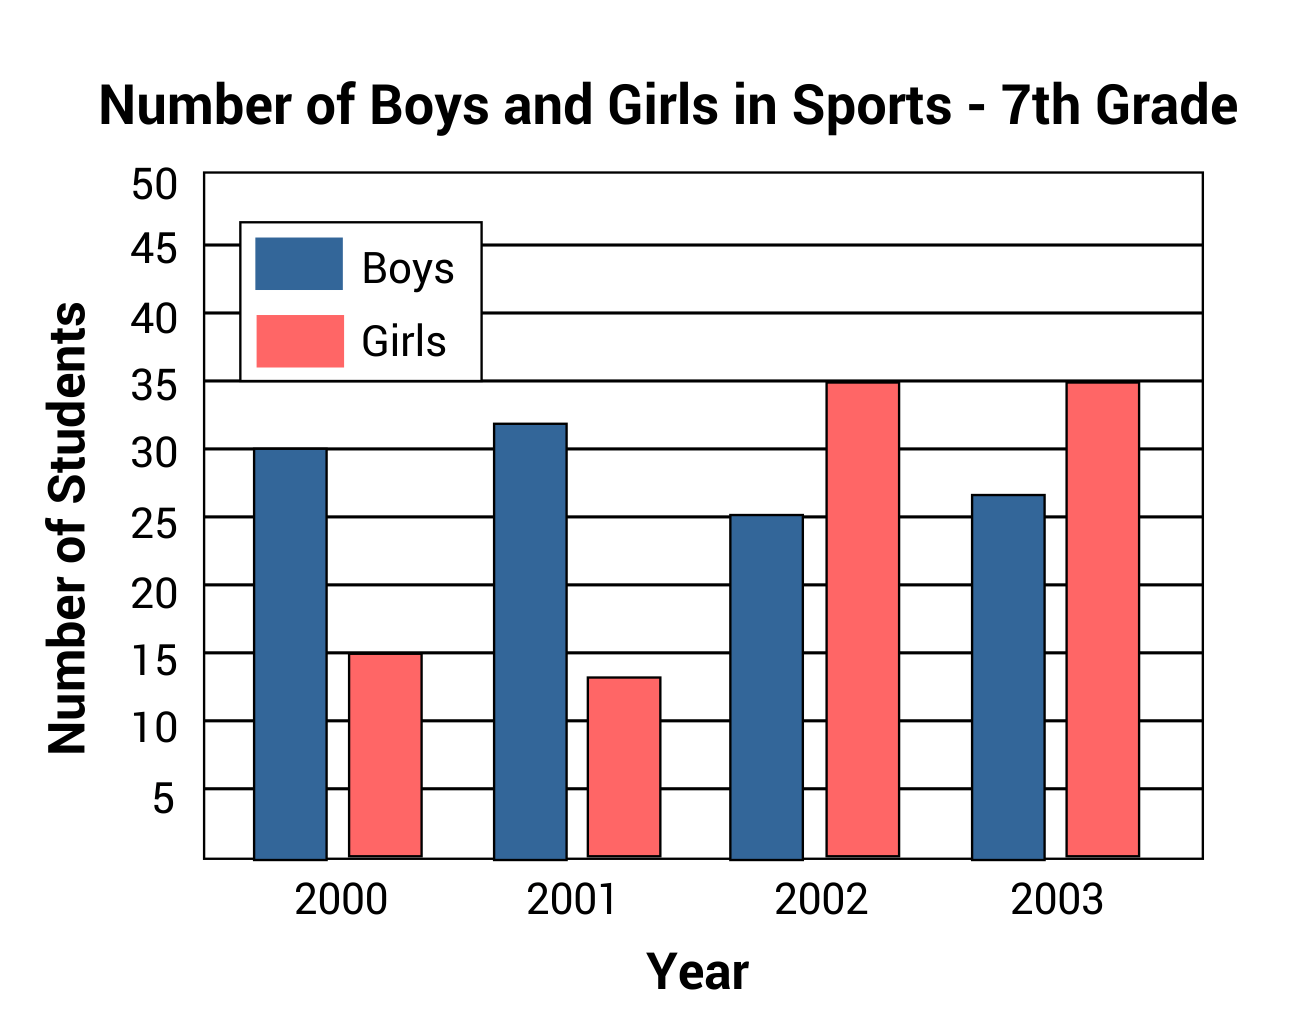 Bar graph of number of boys and girls in the seventh grade